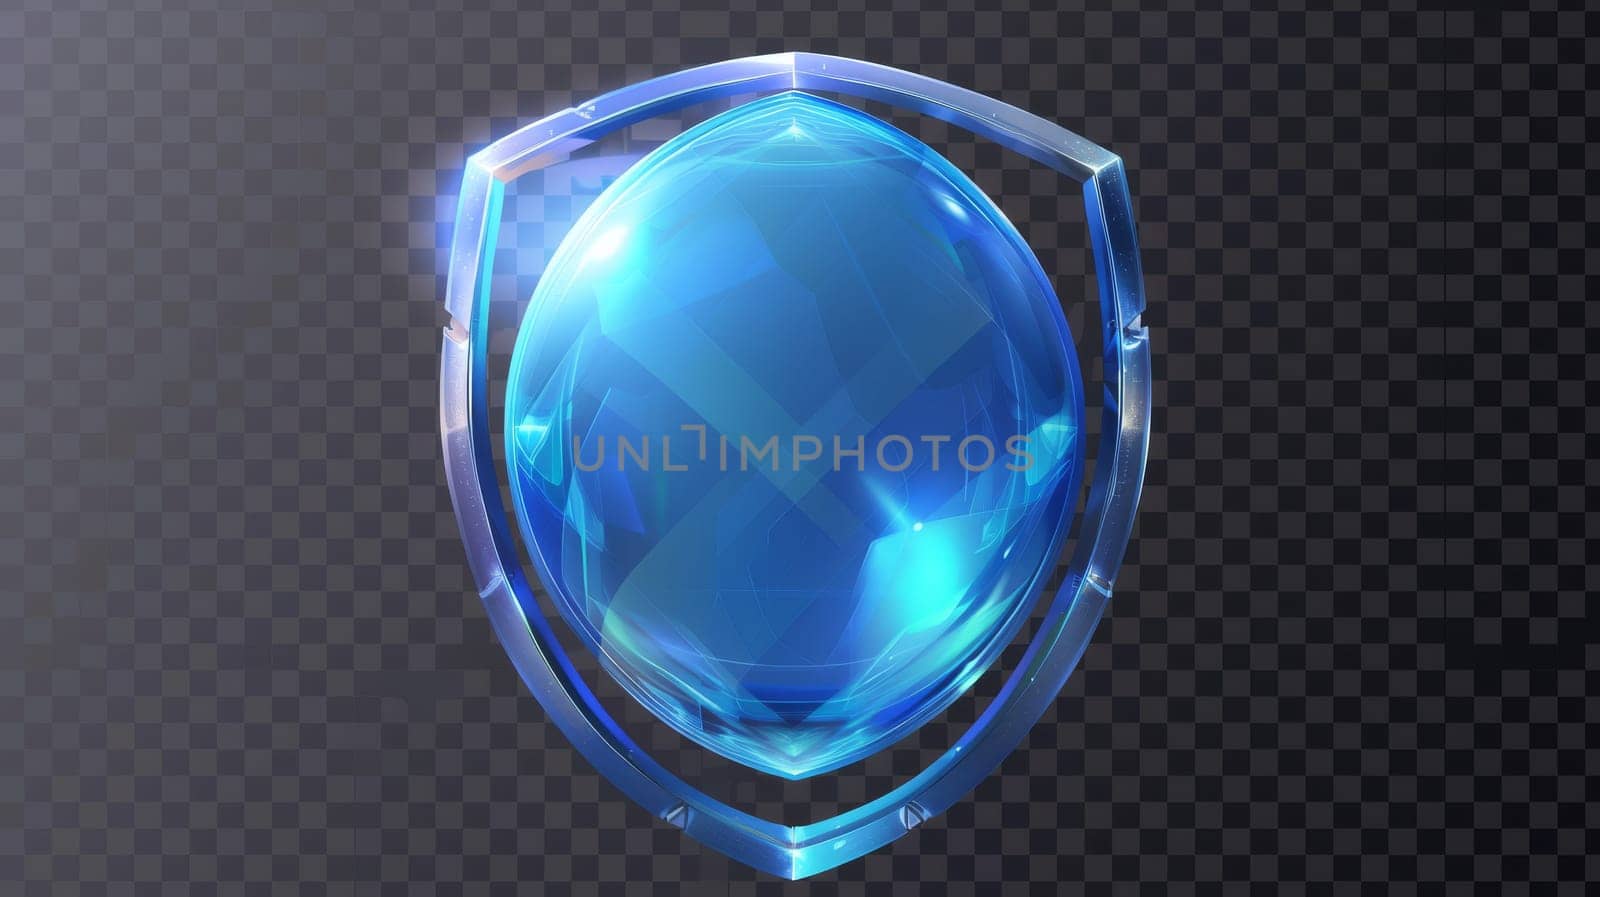 Sphere shield illustration on transparent background. Defense technology guard plastic case with hexagon mesh.